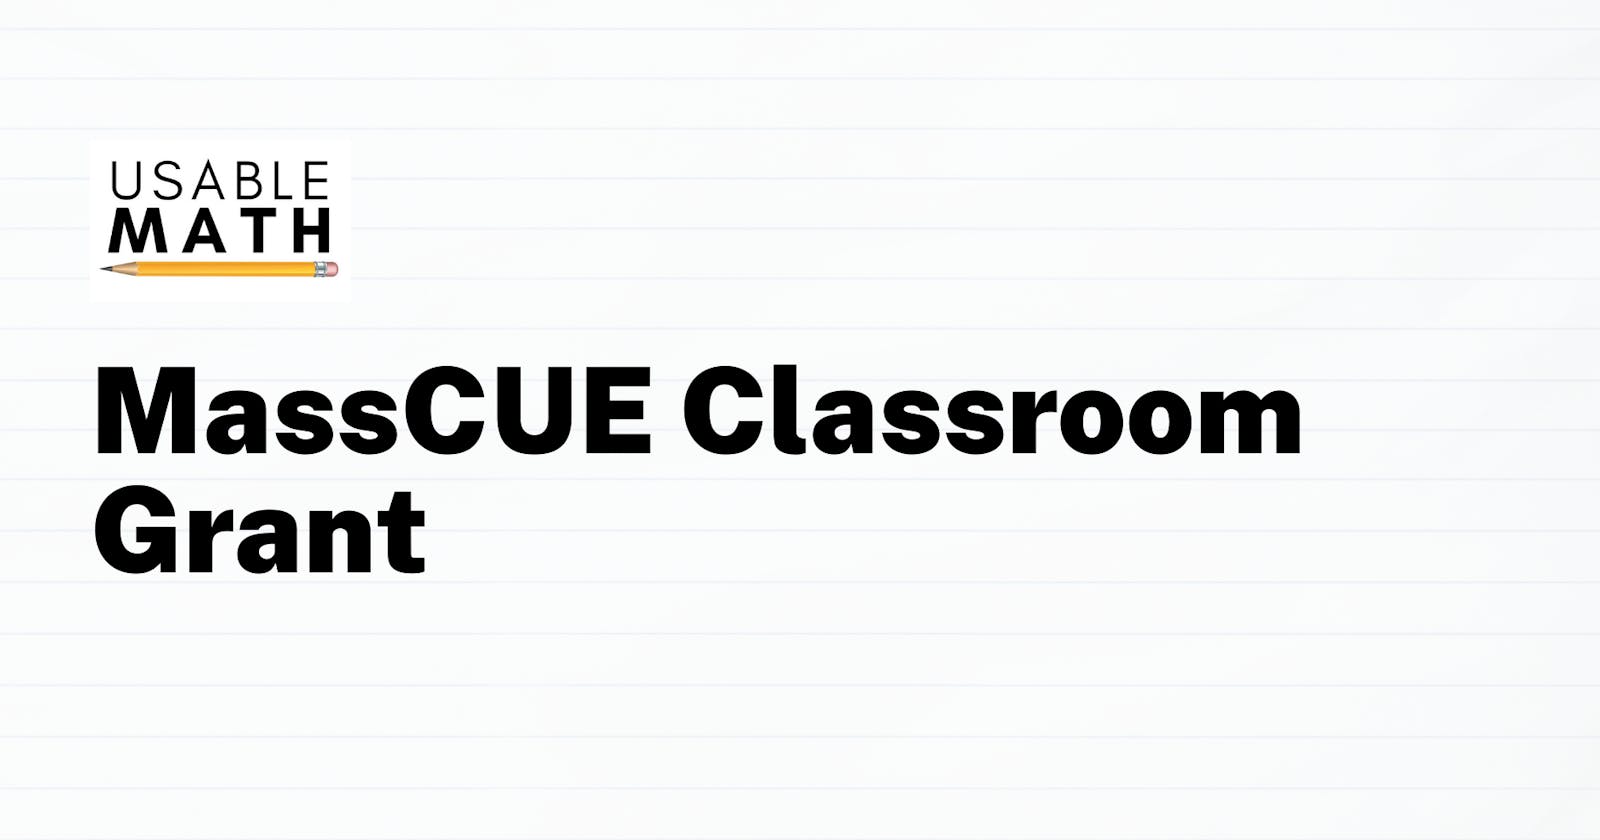 Usable Math featured on MassCUE OnCUE (External link)